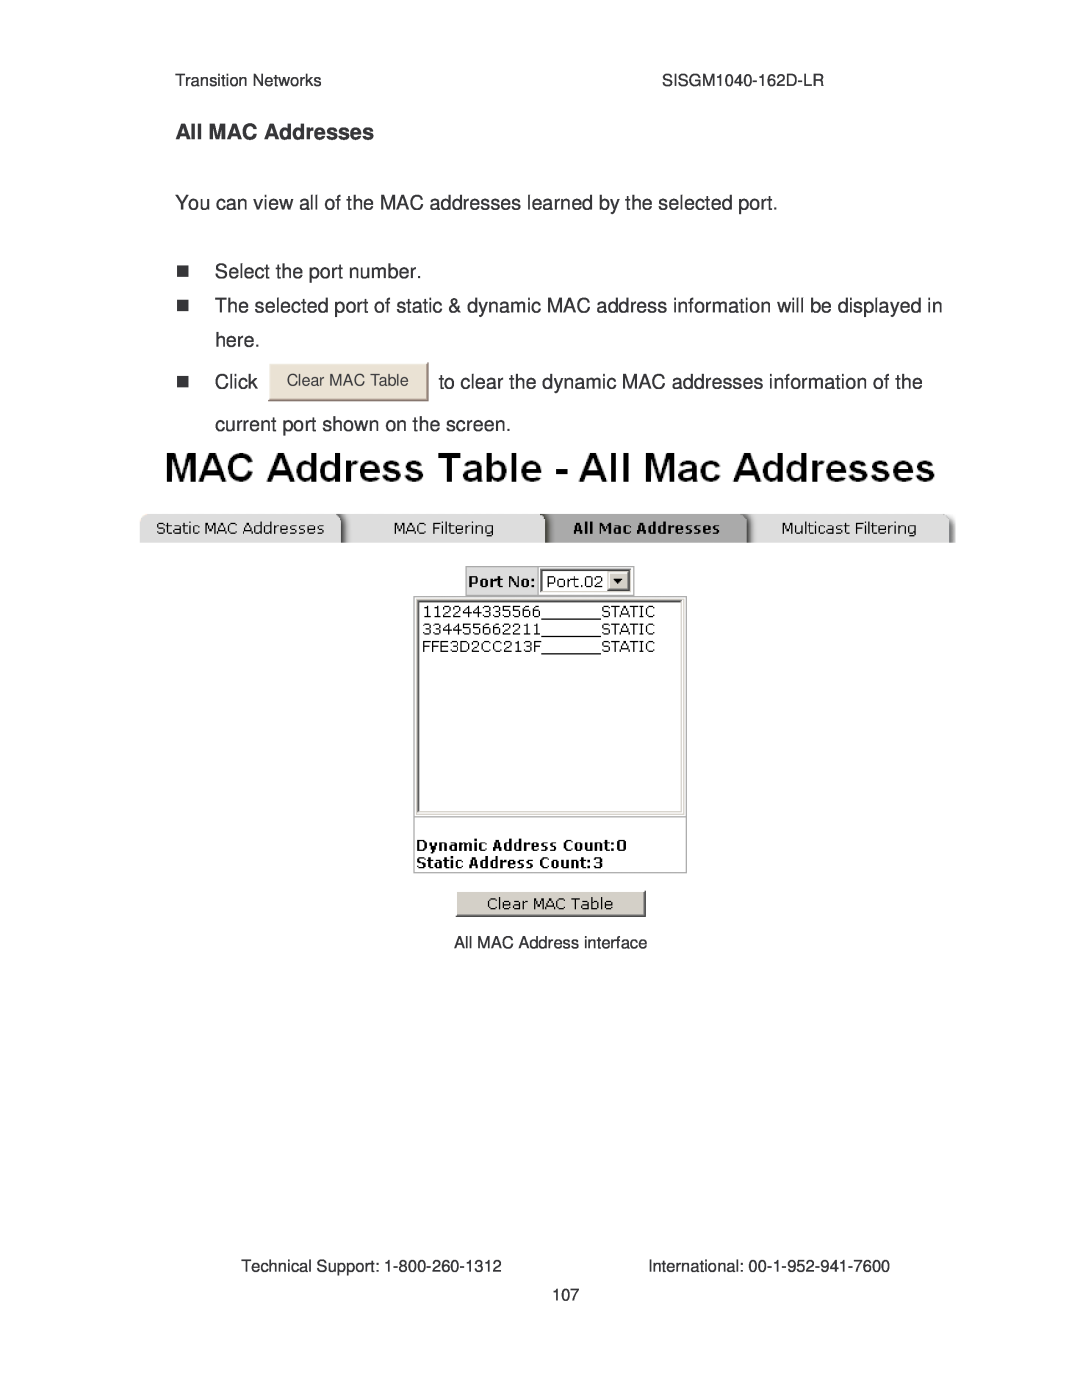 Transition Networks manual All MAC Addresses, Transition Networks, SISGM1040-162D-LR, Clear MAC Table, Technical Support 